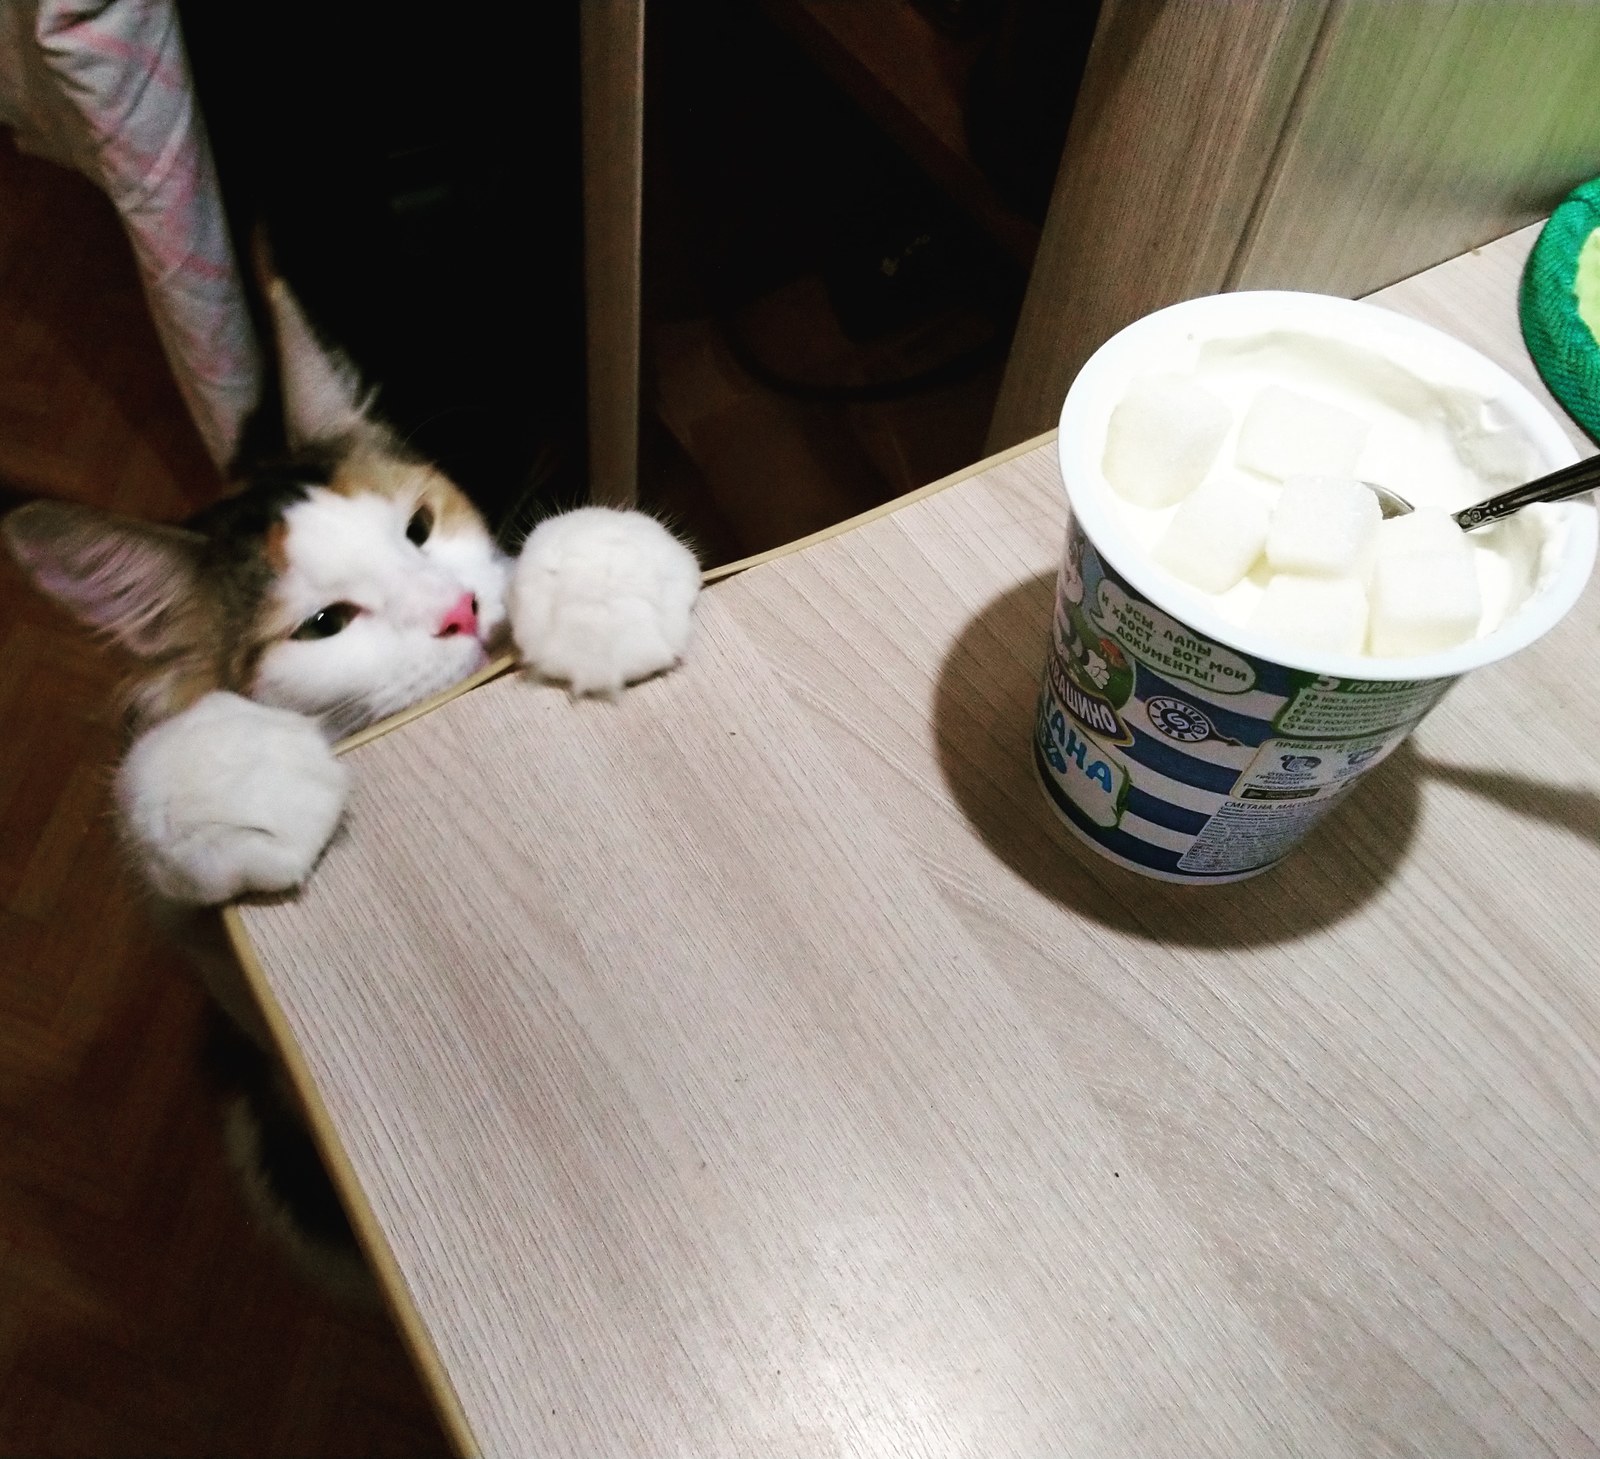 It's sour cream! - My, cat, Maine Coon, Sour cream, , Give